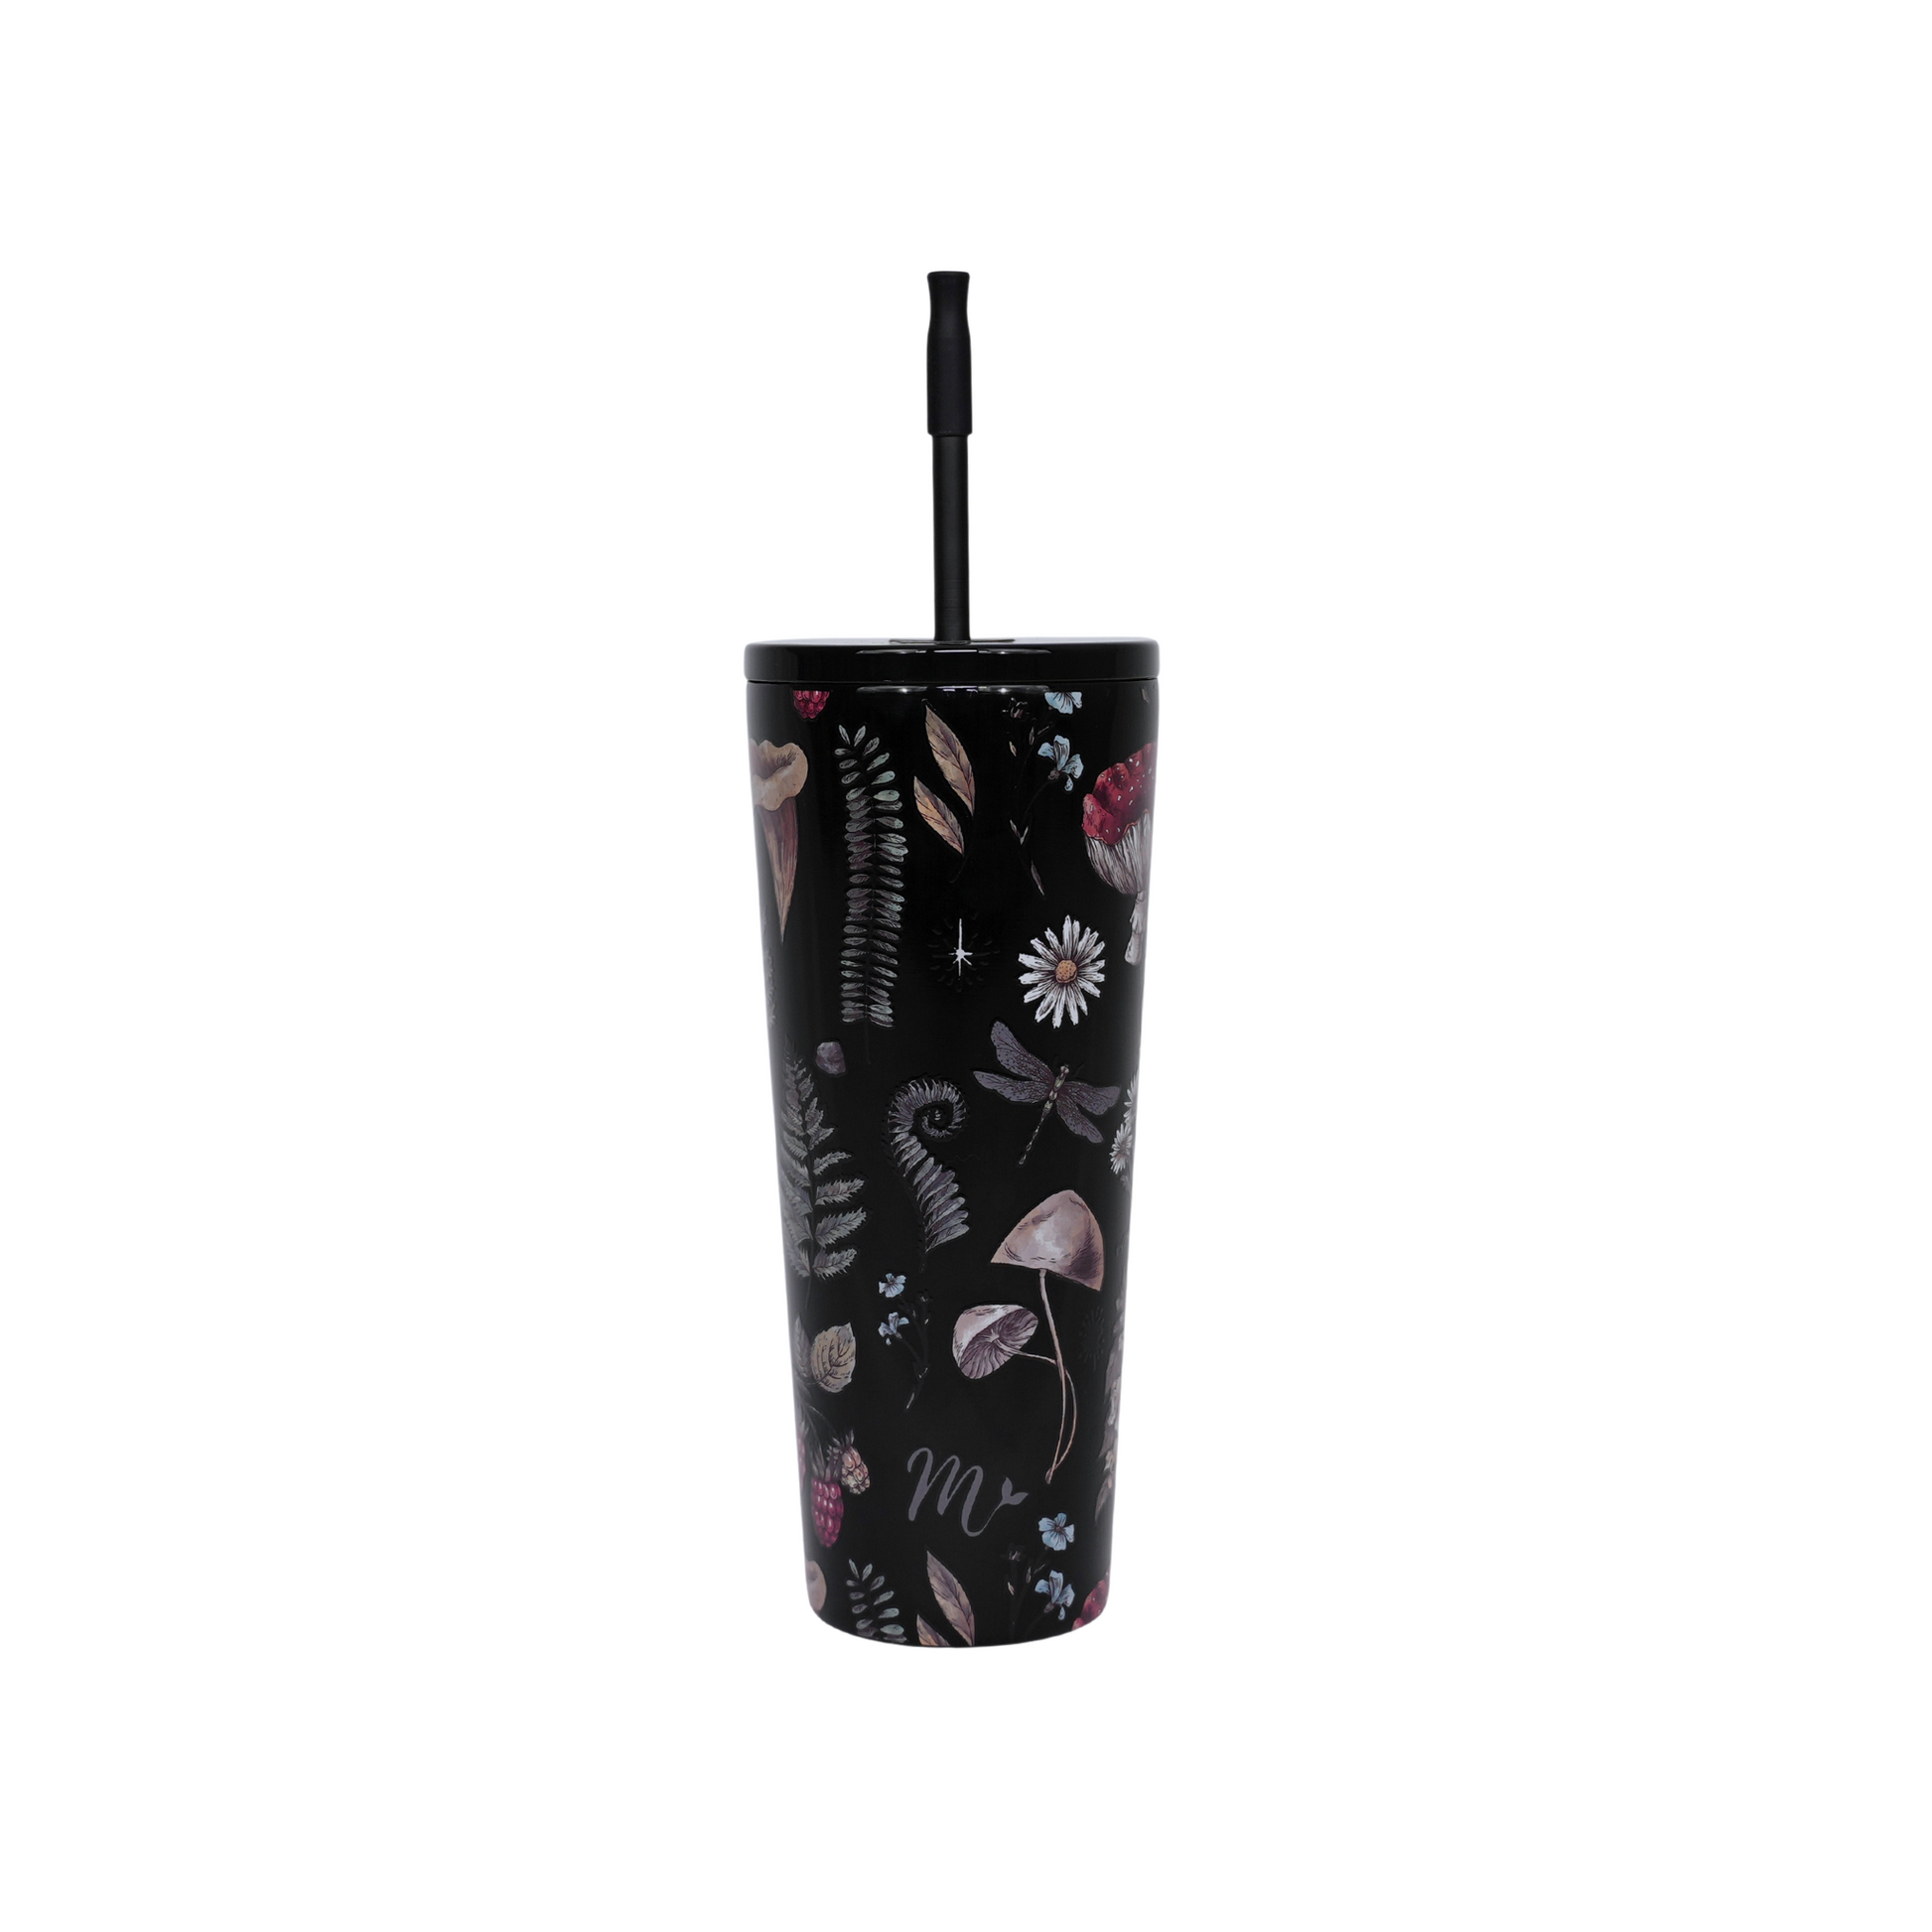 fairy tumbler, cutest tumbler, travel mug, leakproof tumbler, keeps drinks cold, straw included